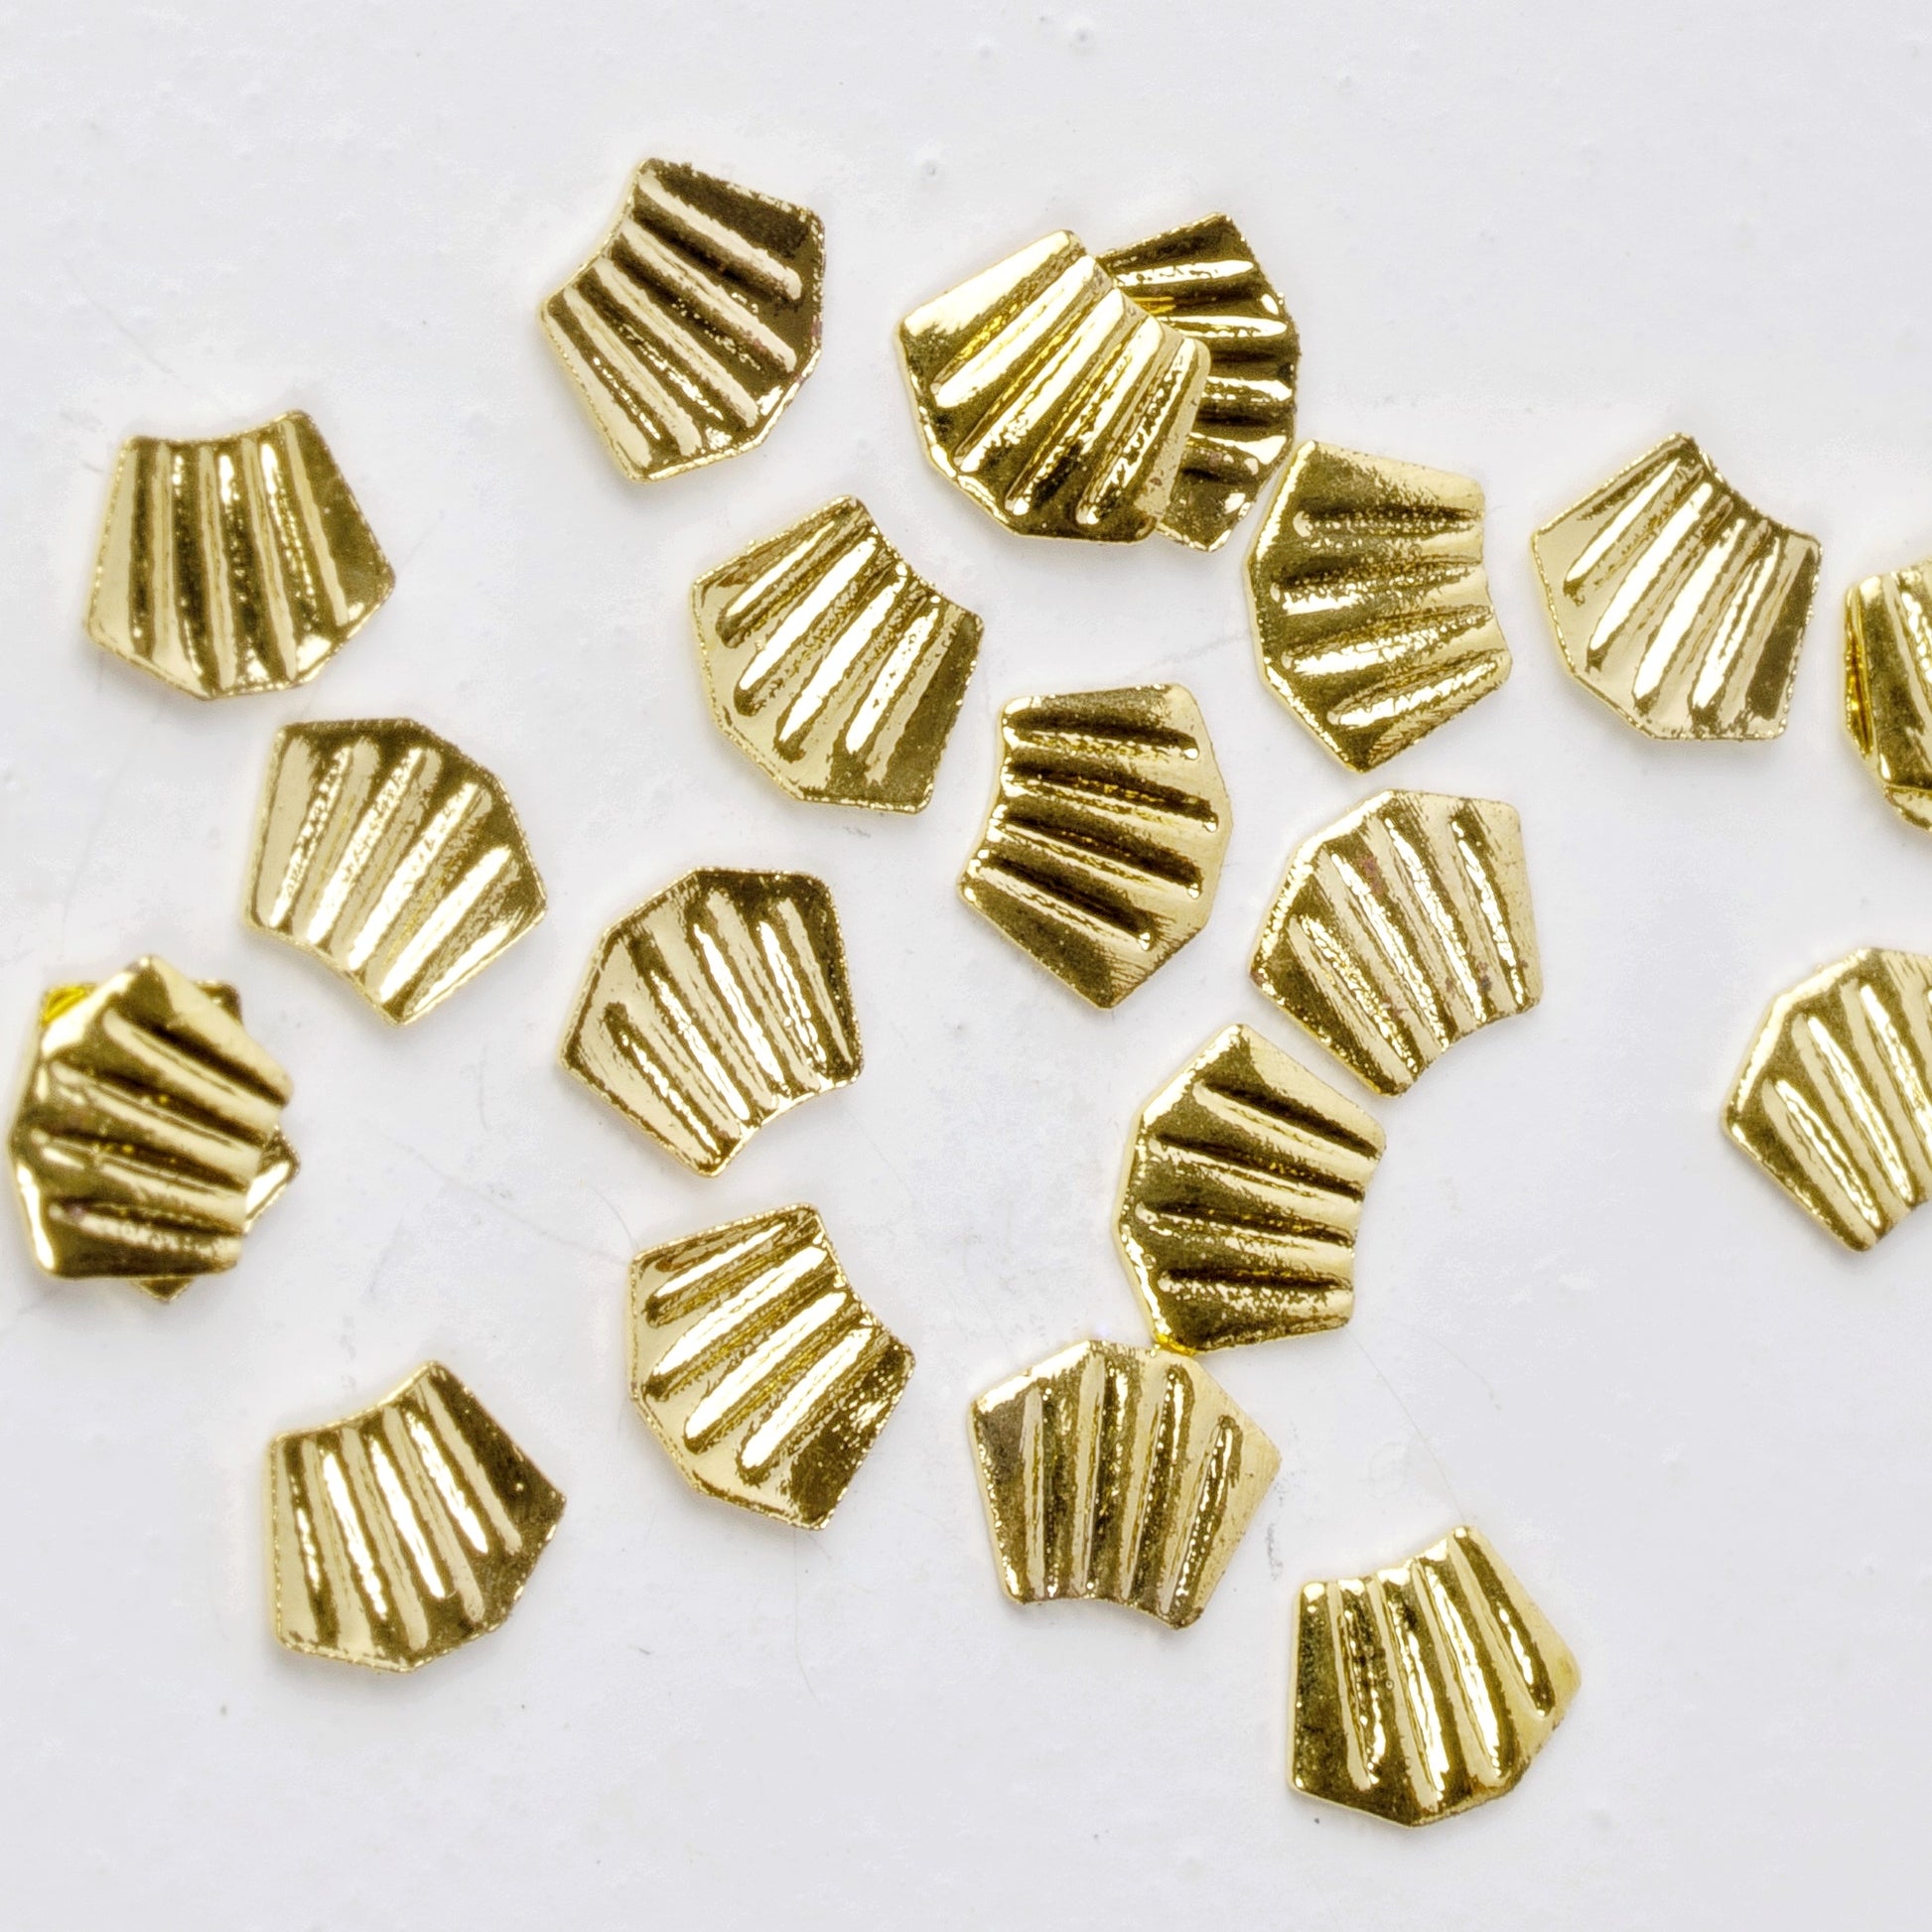 Gold nail charms scattered on white background.